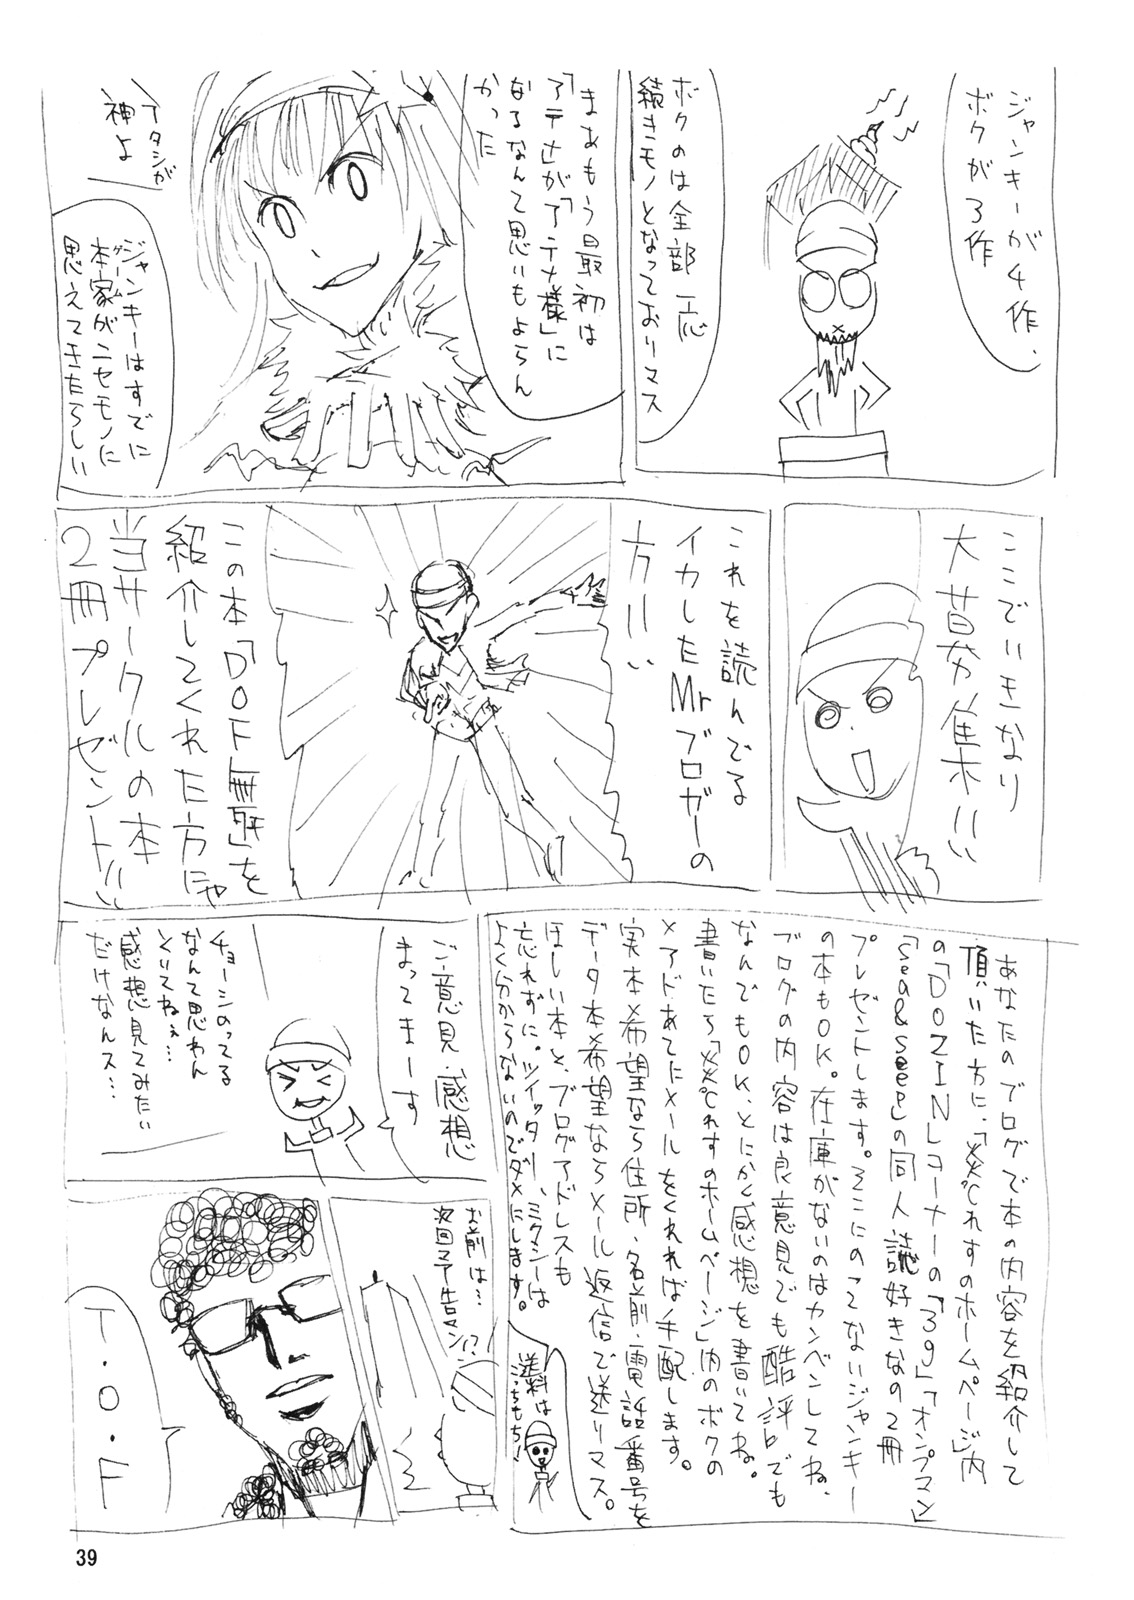 [3g (Junkie)] DOF Mai (King of Fighters) page 38 full